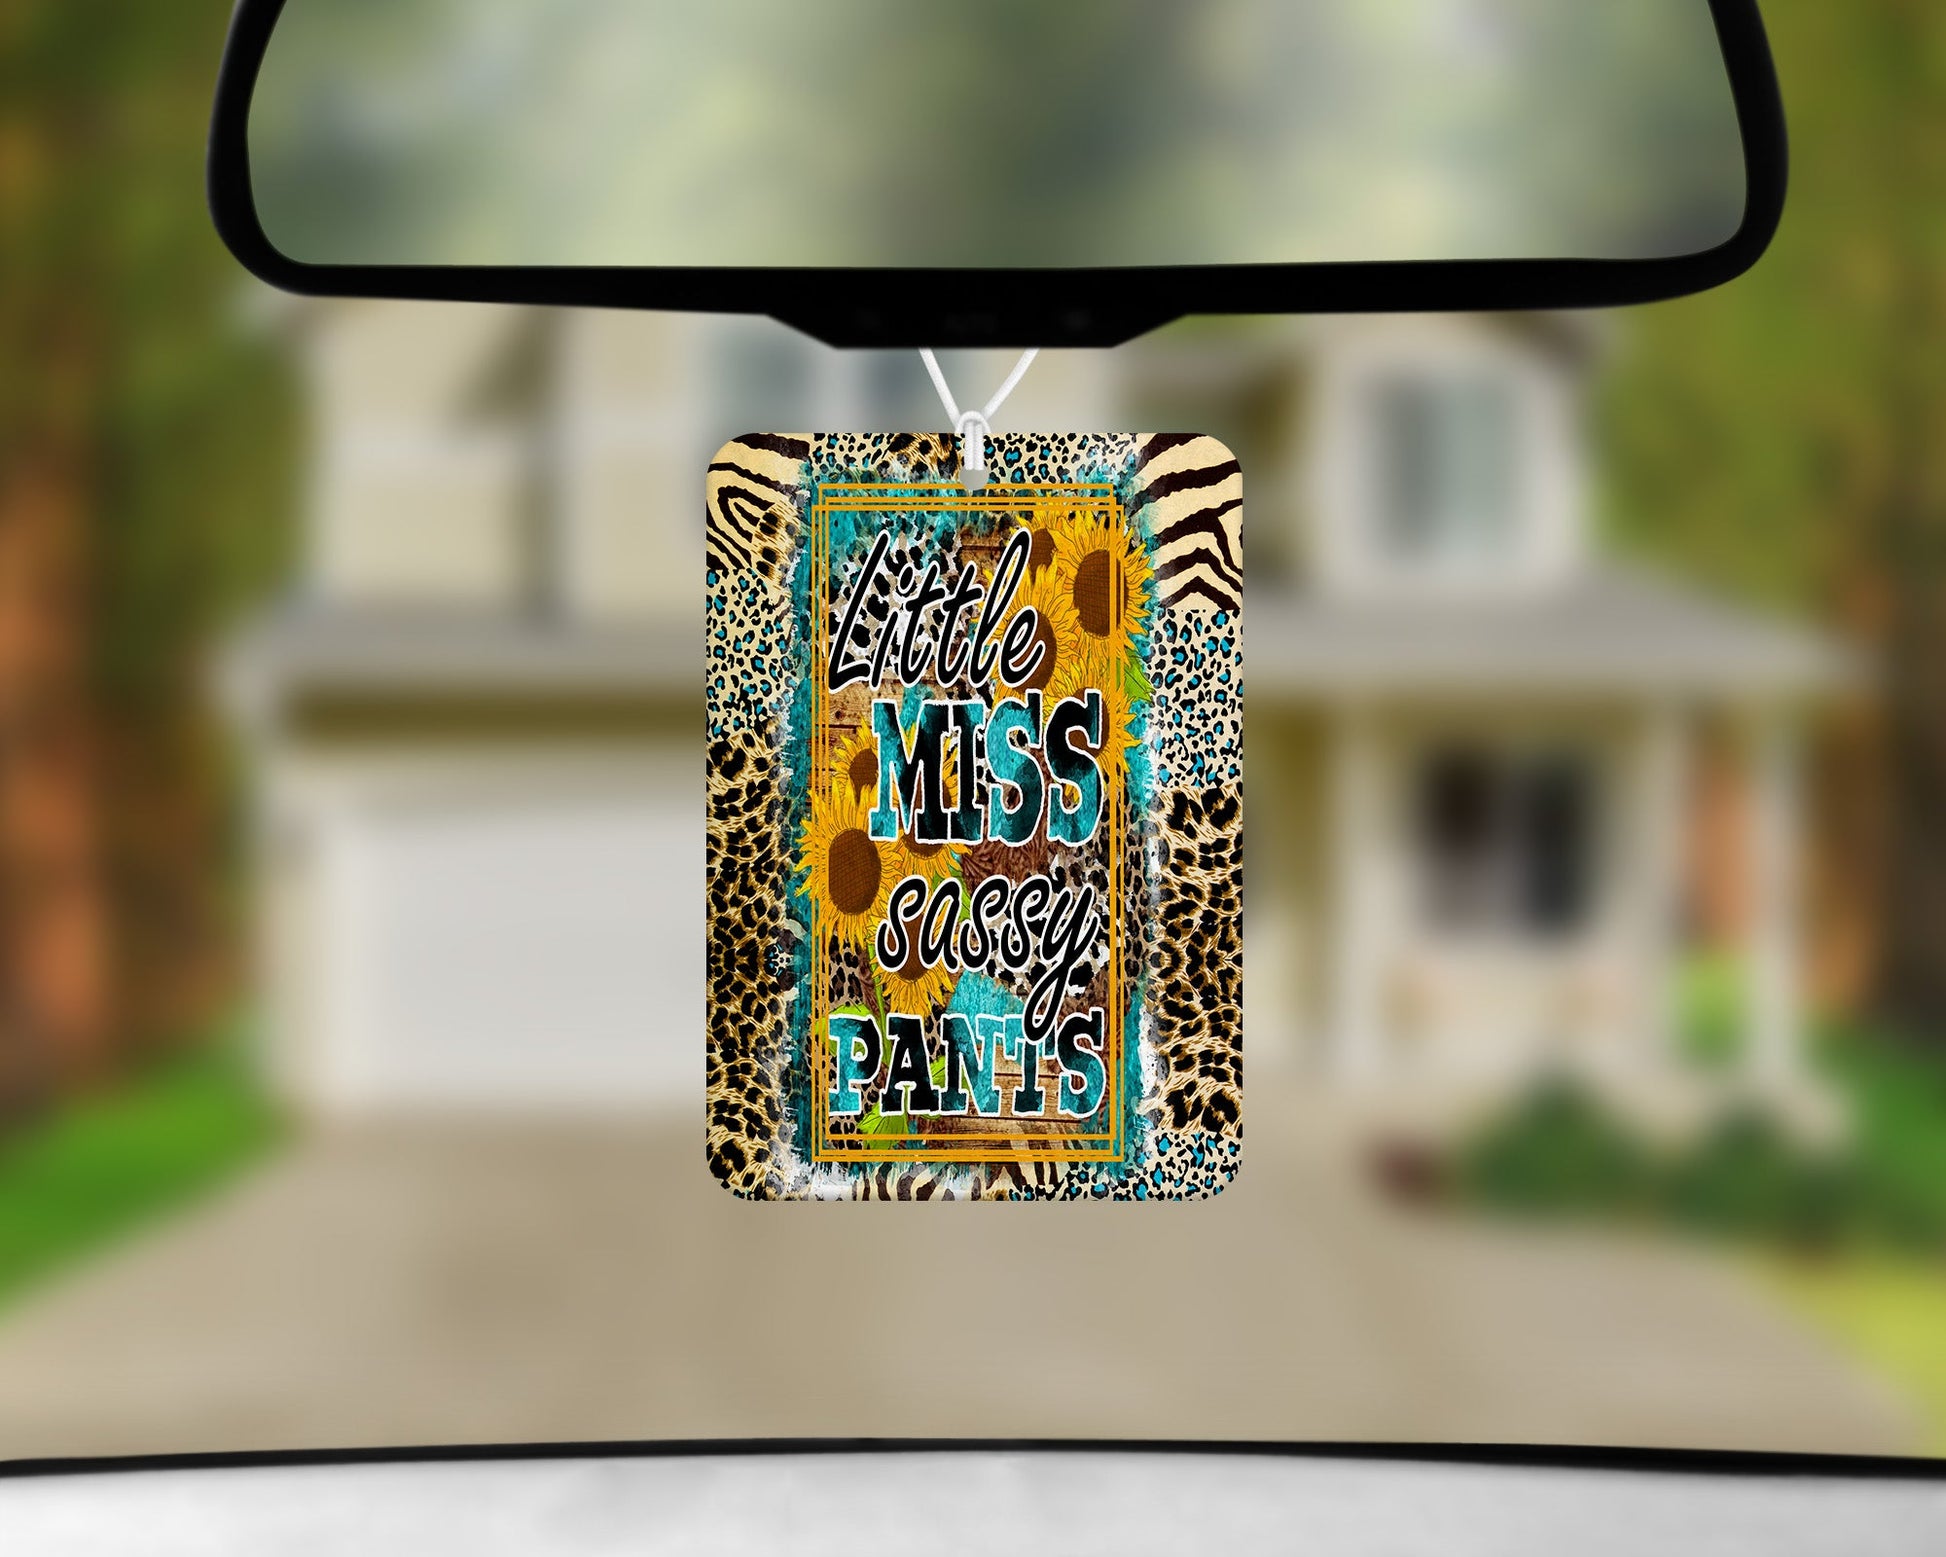 Little Miss Sassy Pants|Freshie|Includes Scent Bottle - Vehicle Air Freshener